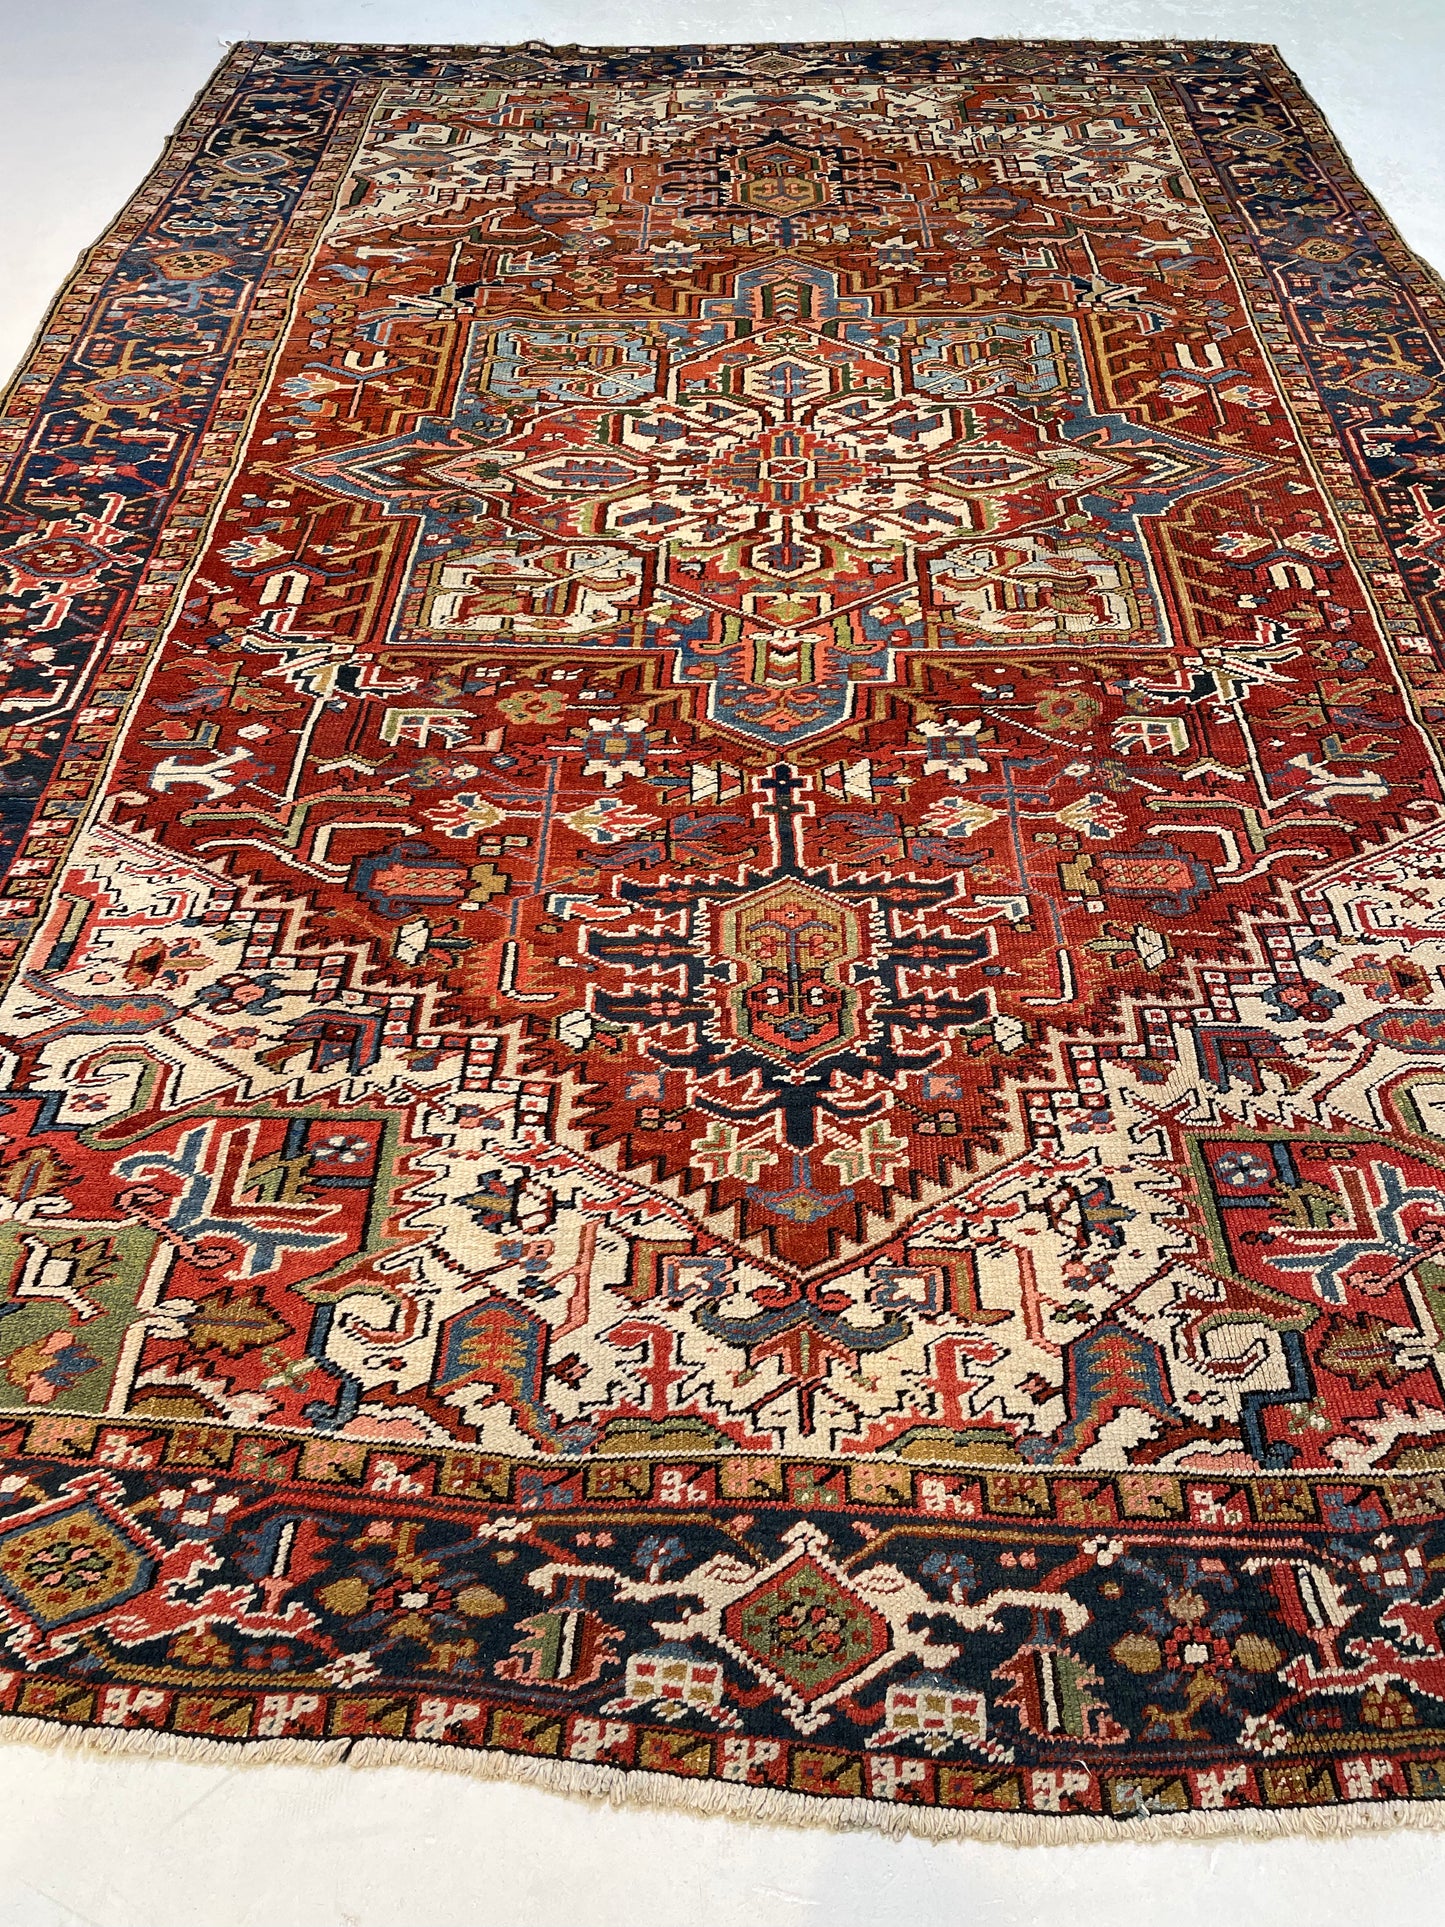 Antique Hand-Knotted Wool Area Rug Heriz 8' x 11'5"